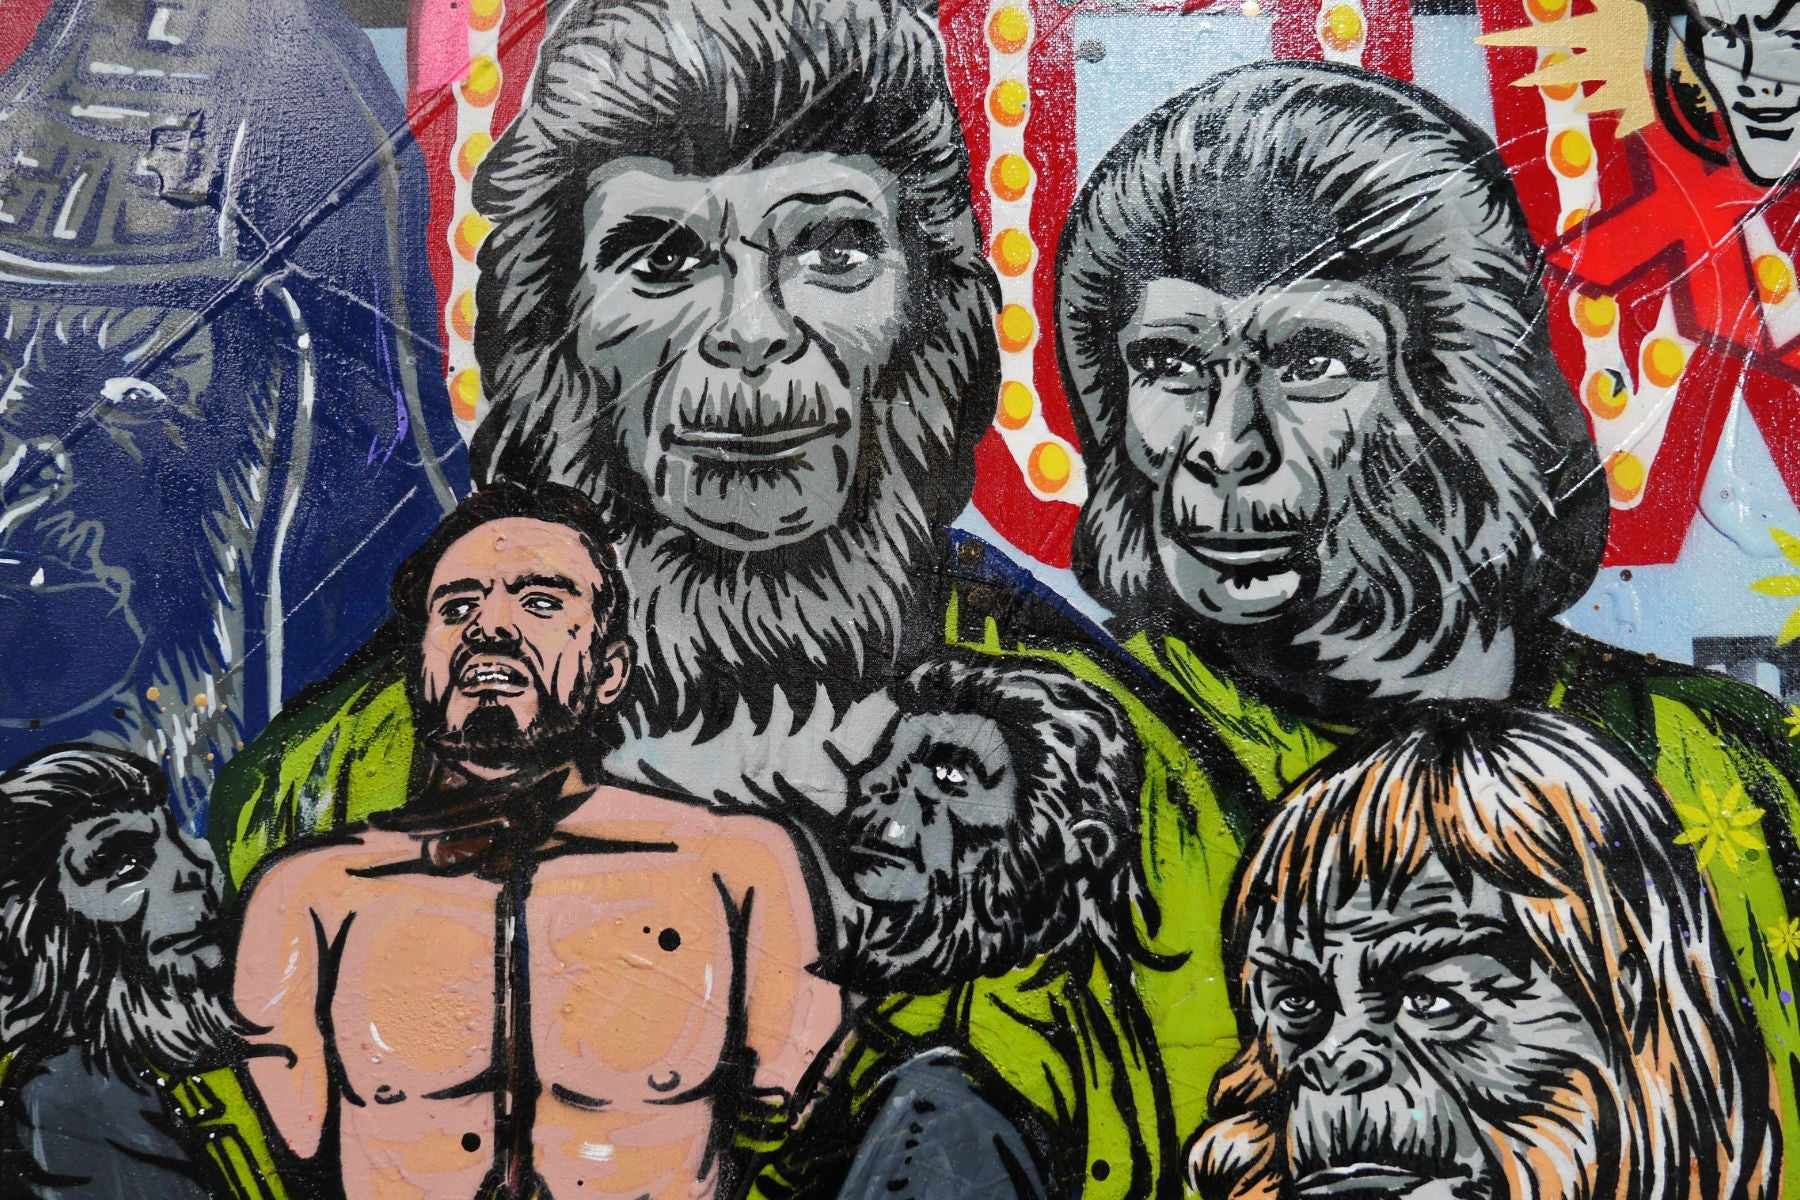 The Planet 190cm x 100cm Cinema Movies Planet of the Apes Textured Urban Pop Art Painting (SOLD)